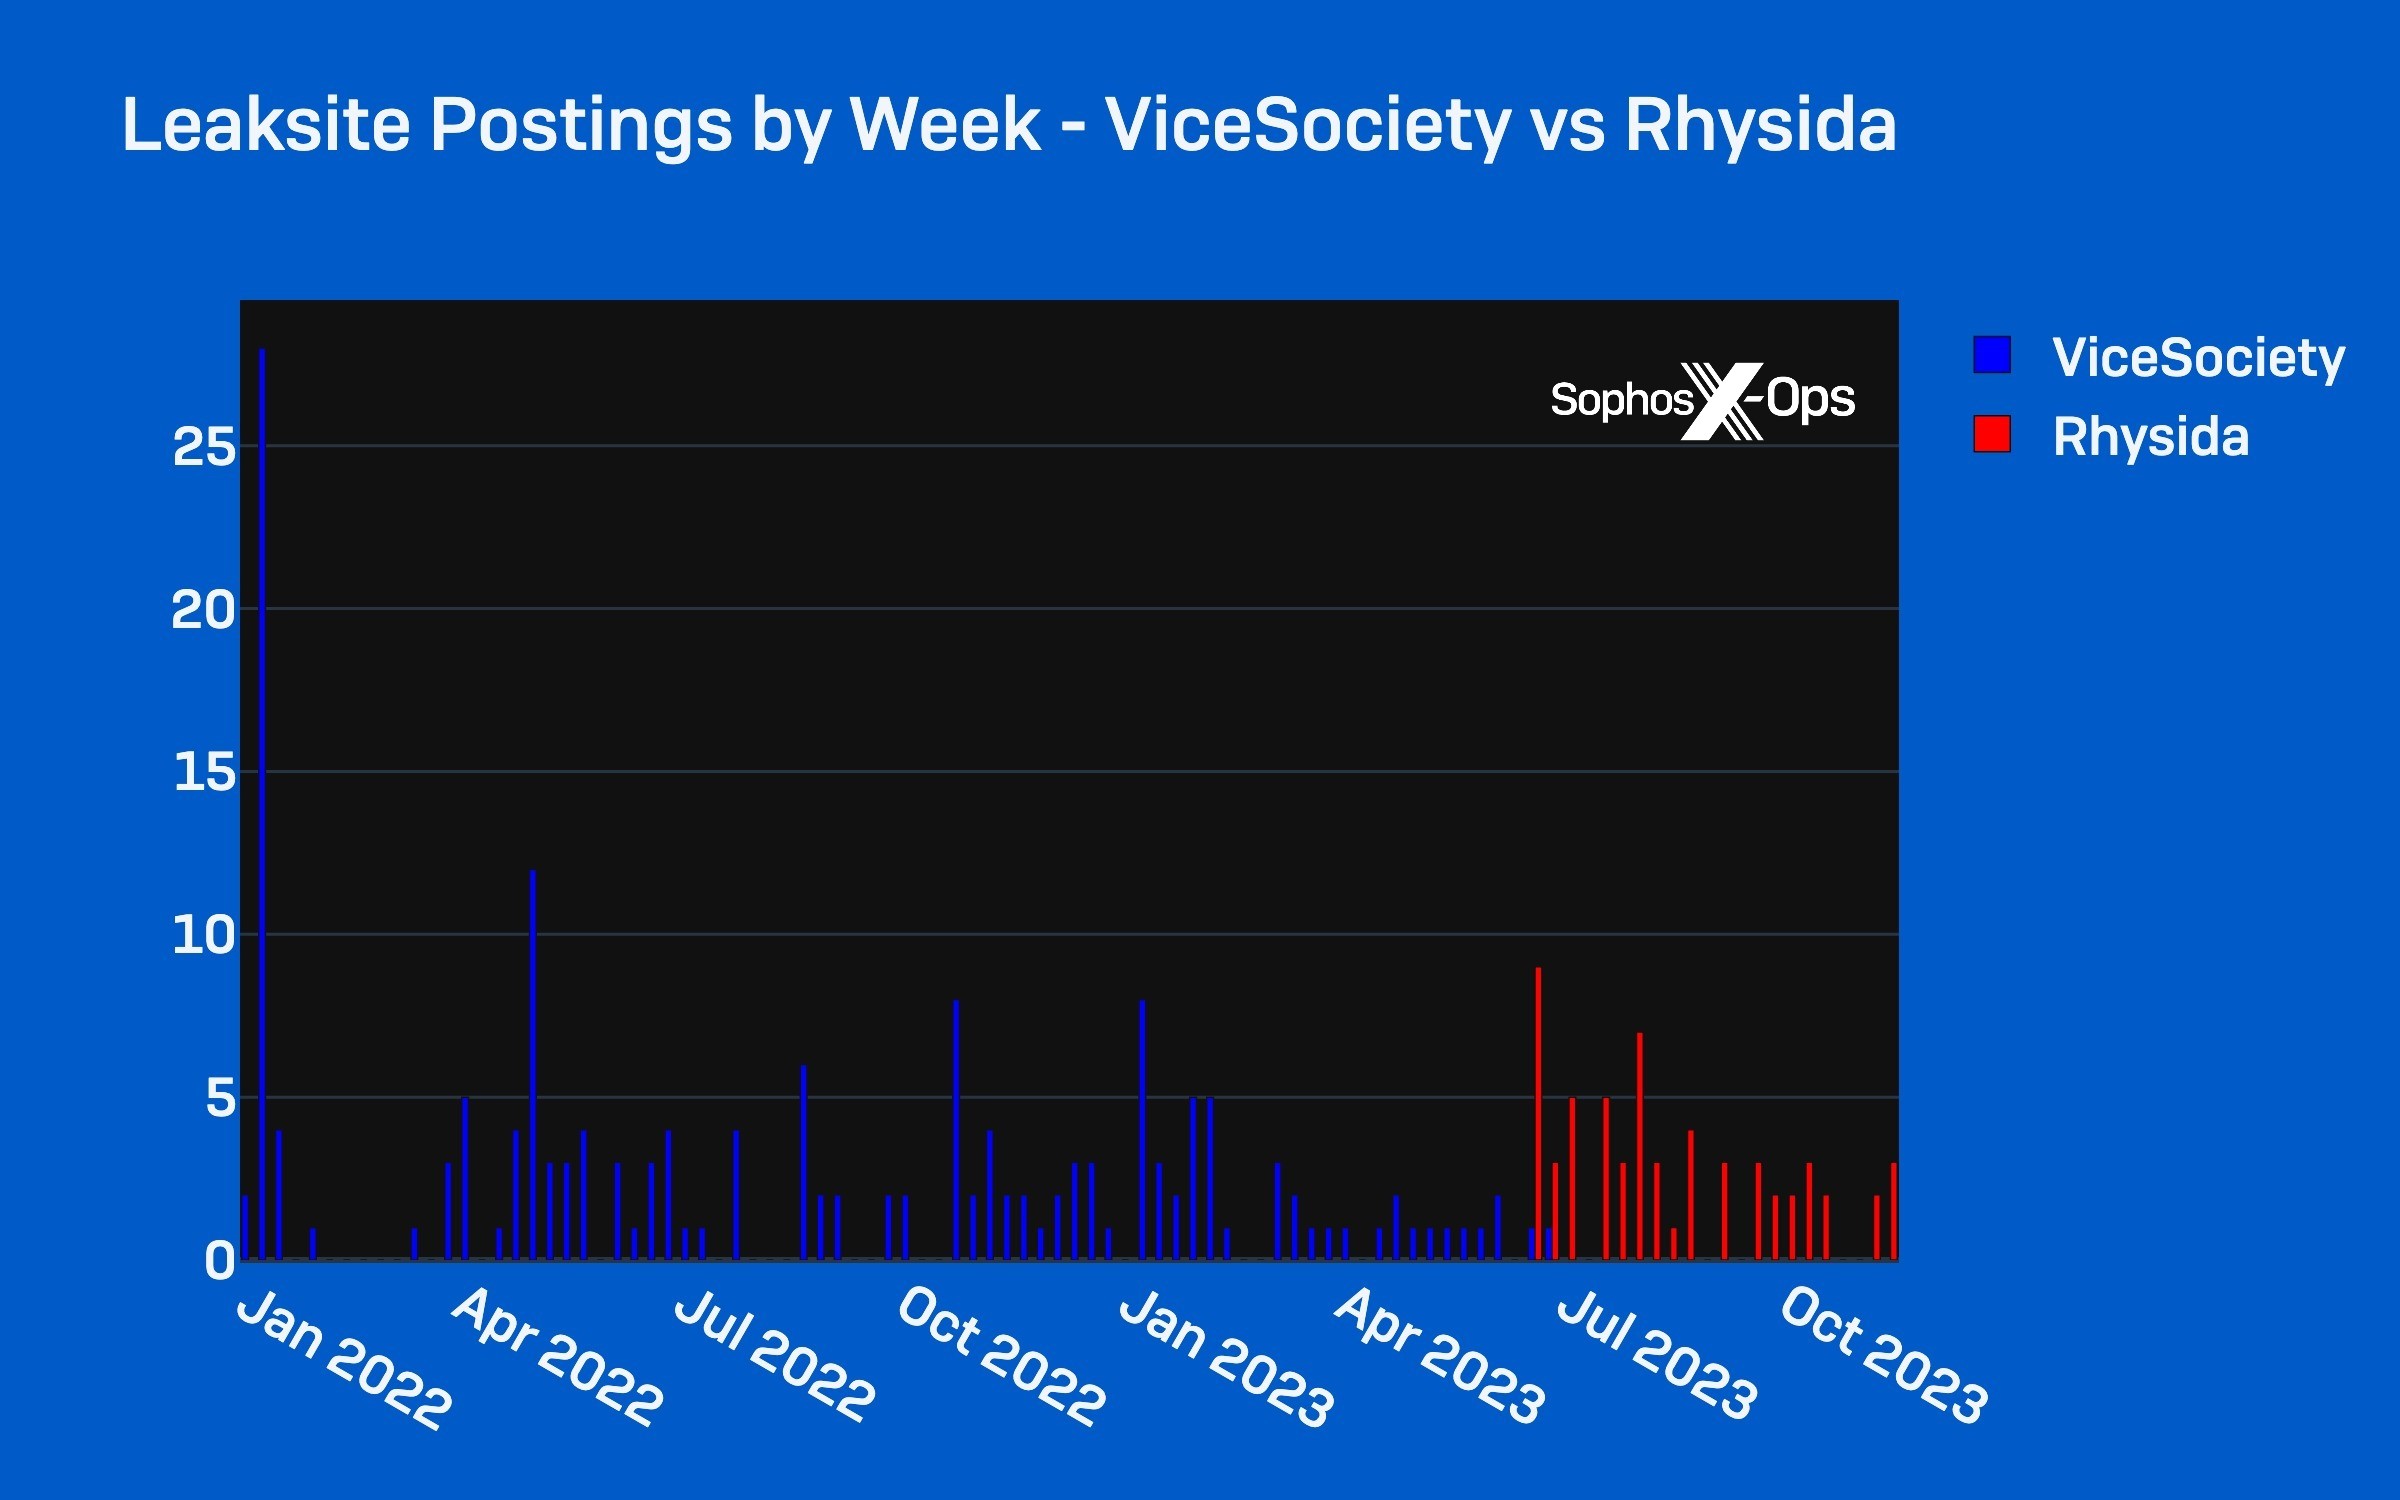 A bar chart showing weekly leaksite postings from ViceSociety and Rhysida from january 2022 to October 2023. The four-week period of overlap appears in late June / early July.